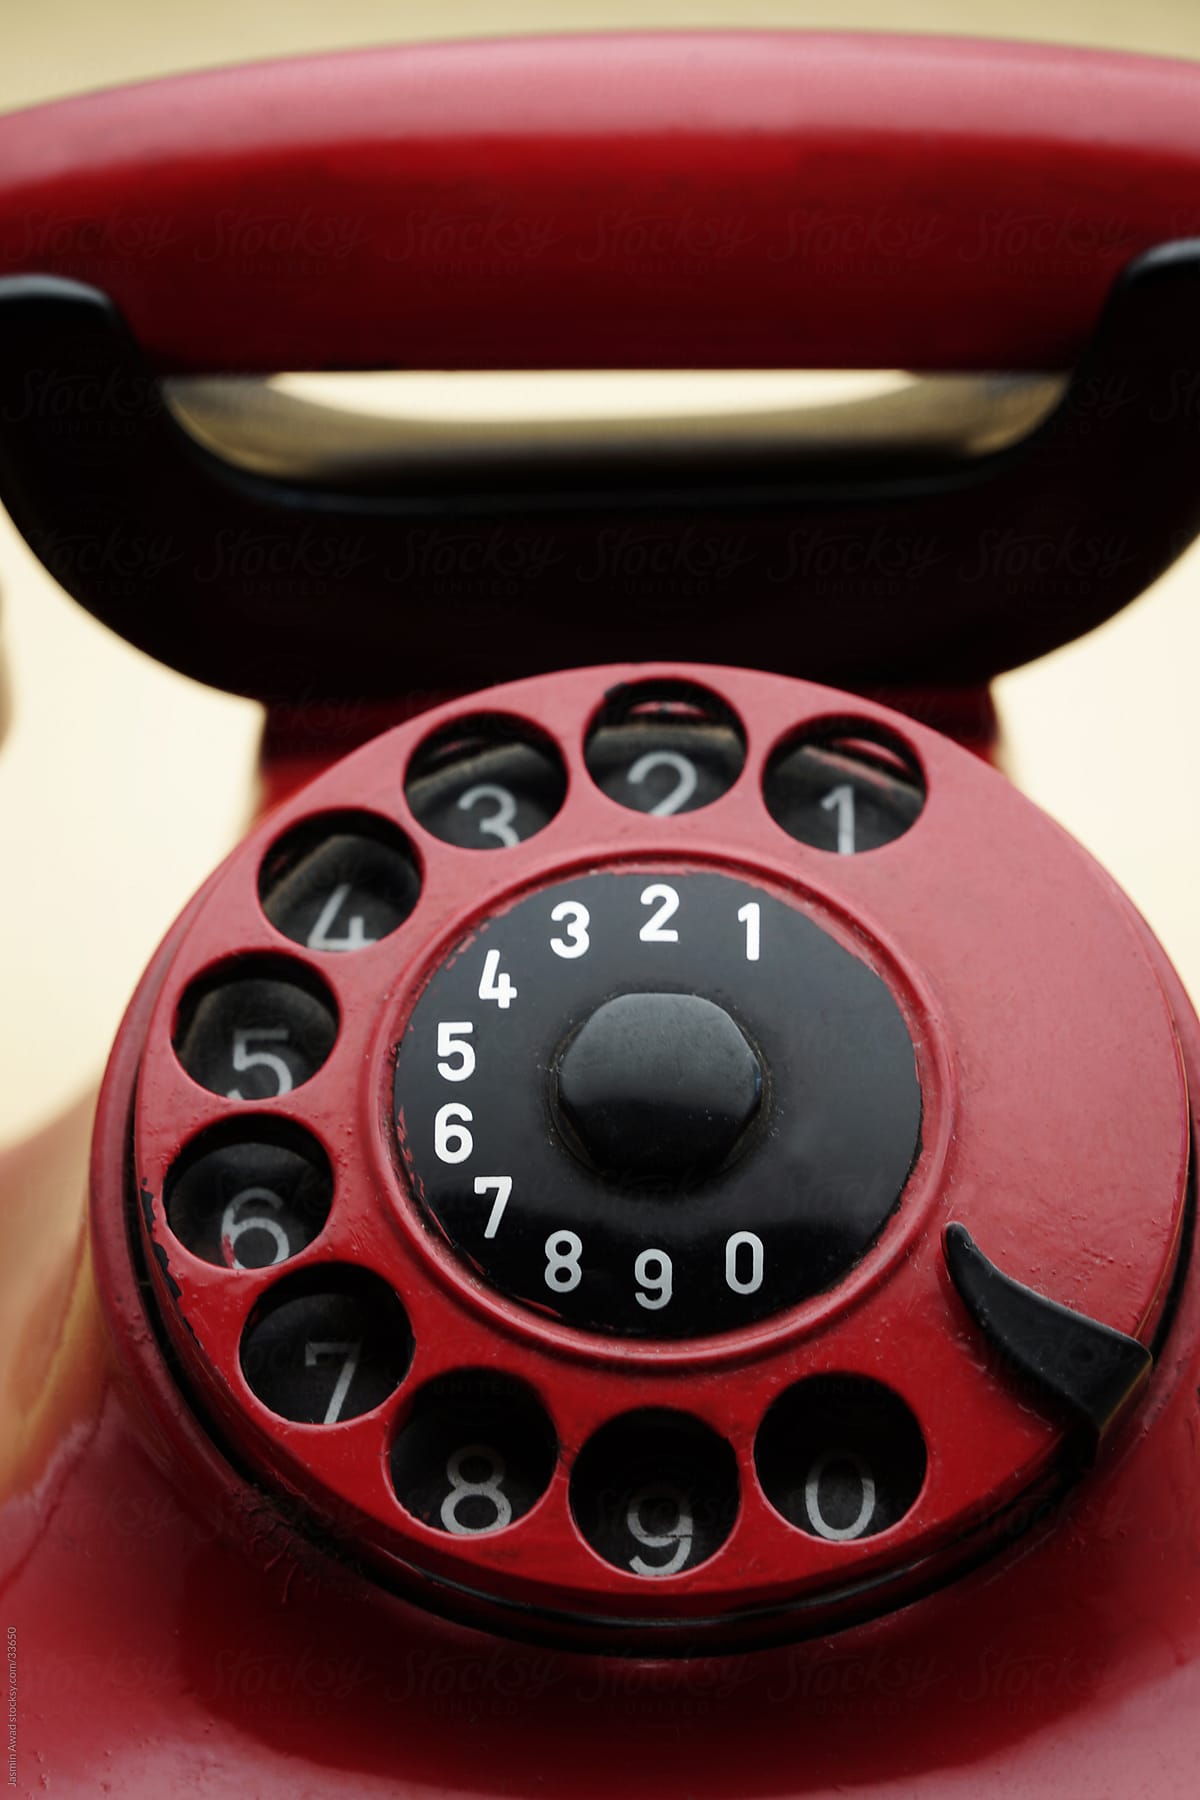 Retro vintage phone with marks and scratches